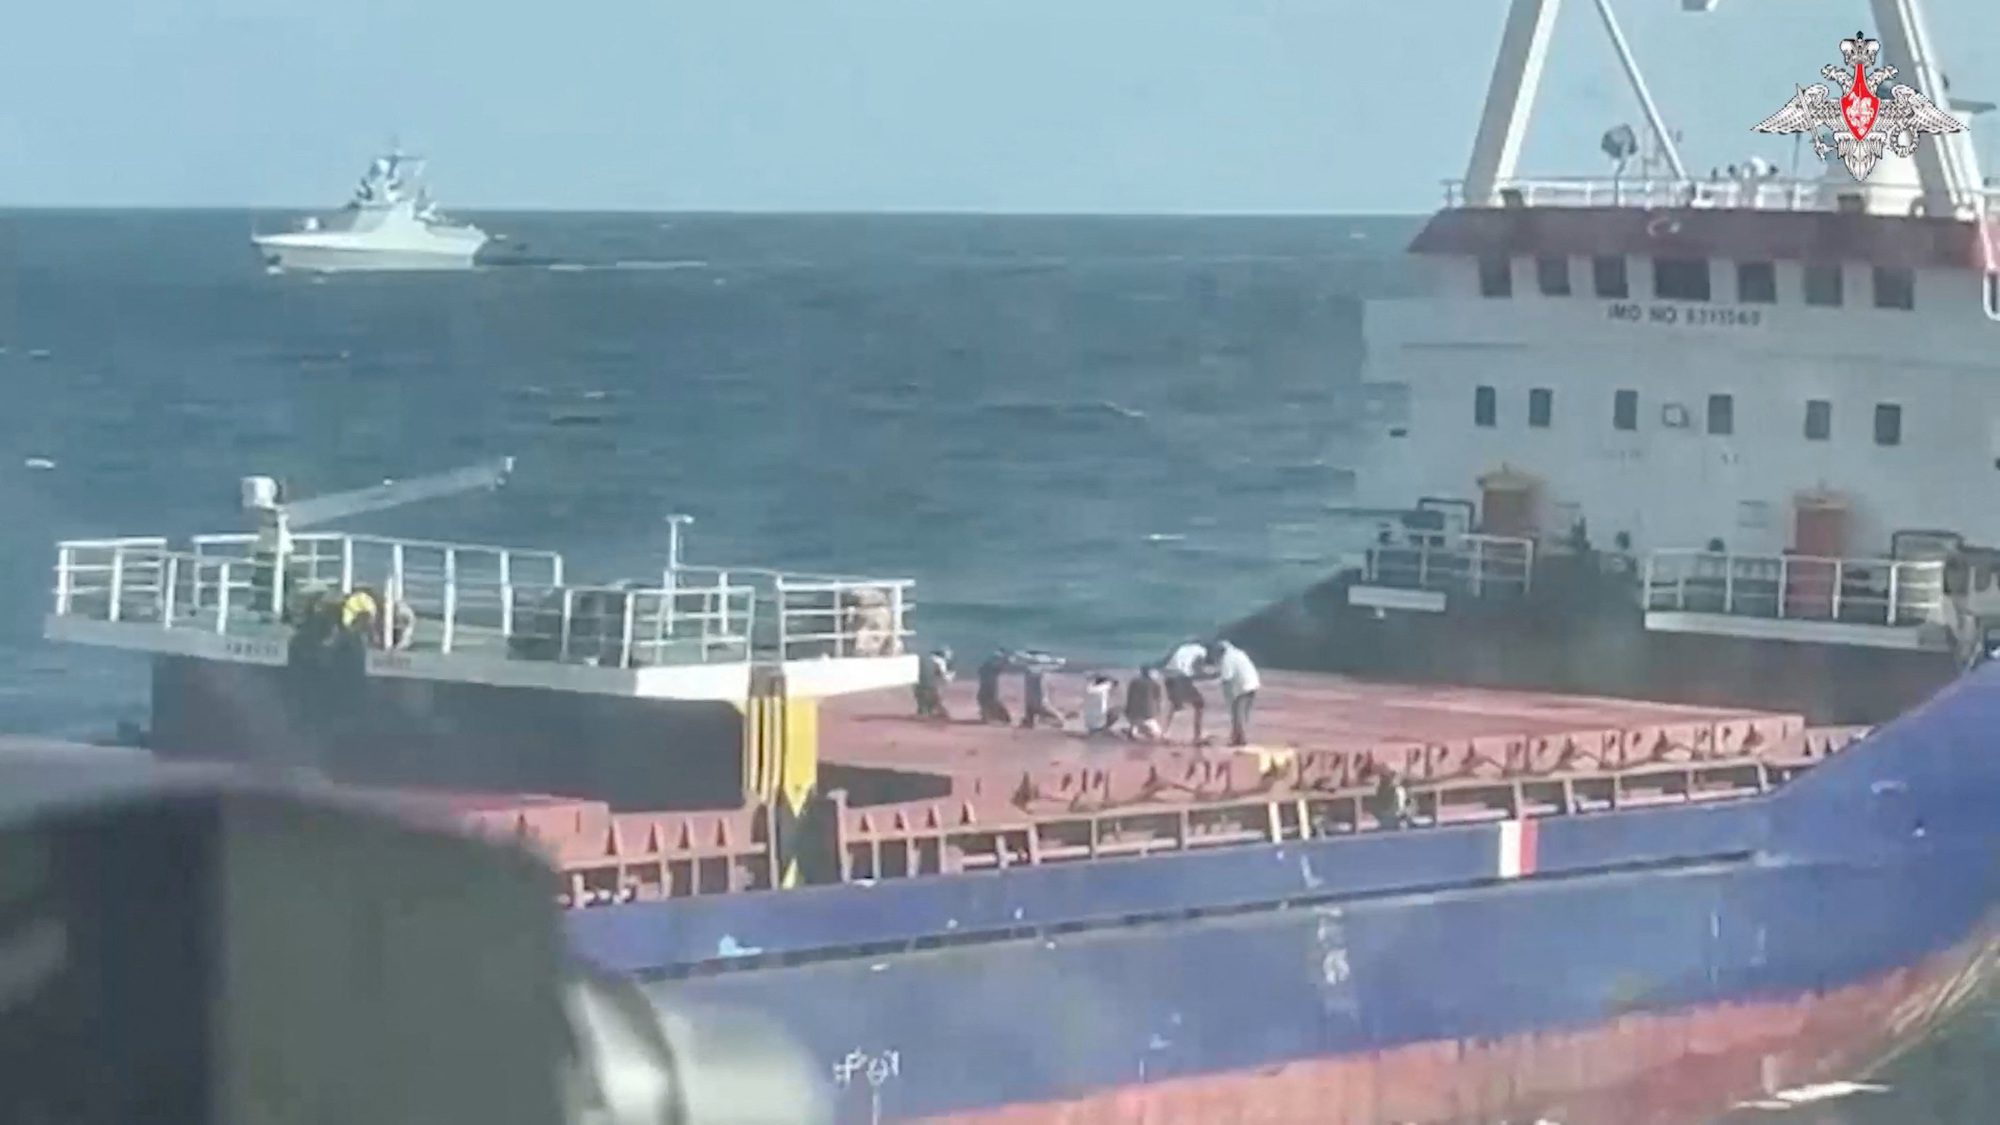 A still image from a video, released by Russia's Defence Ministry, shows what it said to be crew members kneeling down on the deck during an operation held by Russian navy officers to board the Palau-flagged Sukru Okan vessel